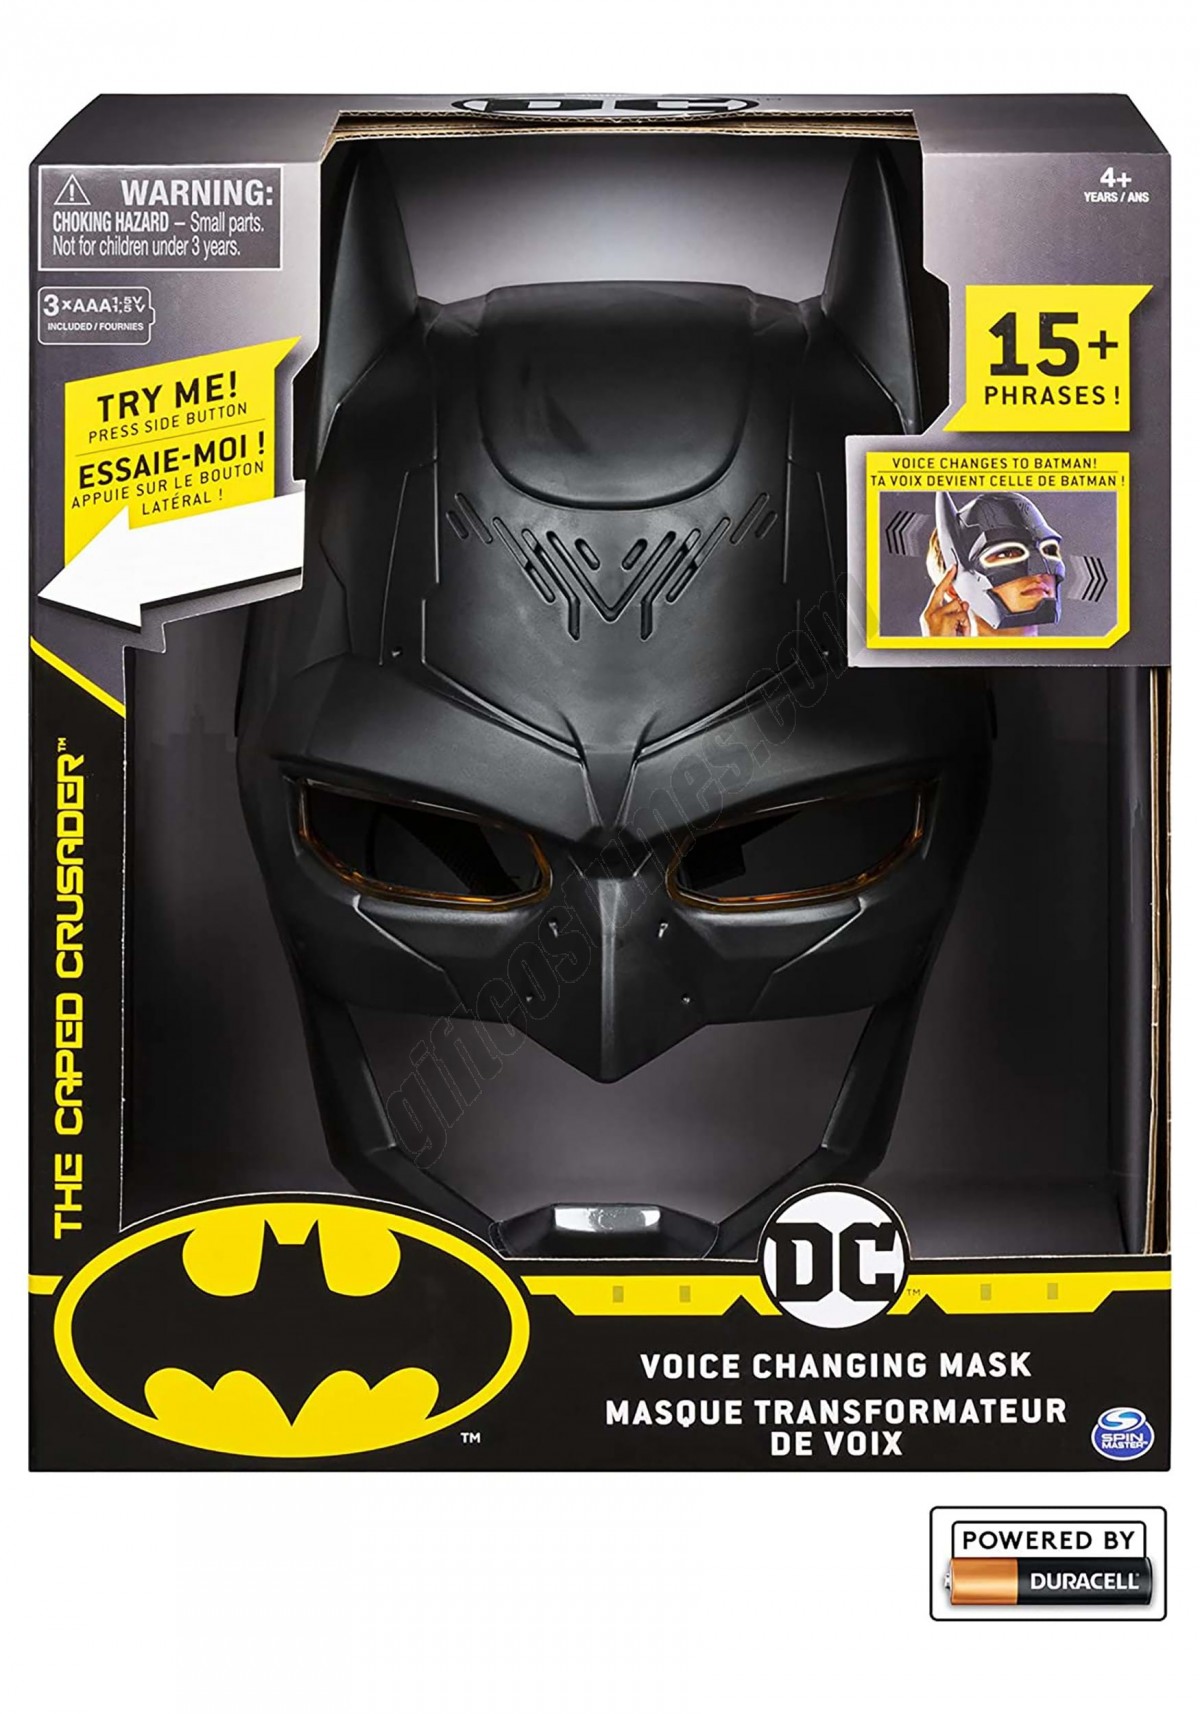 DC Comics Batman Voice Changing Mask with Sound Effects Promotions - -3